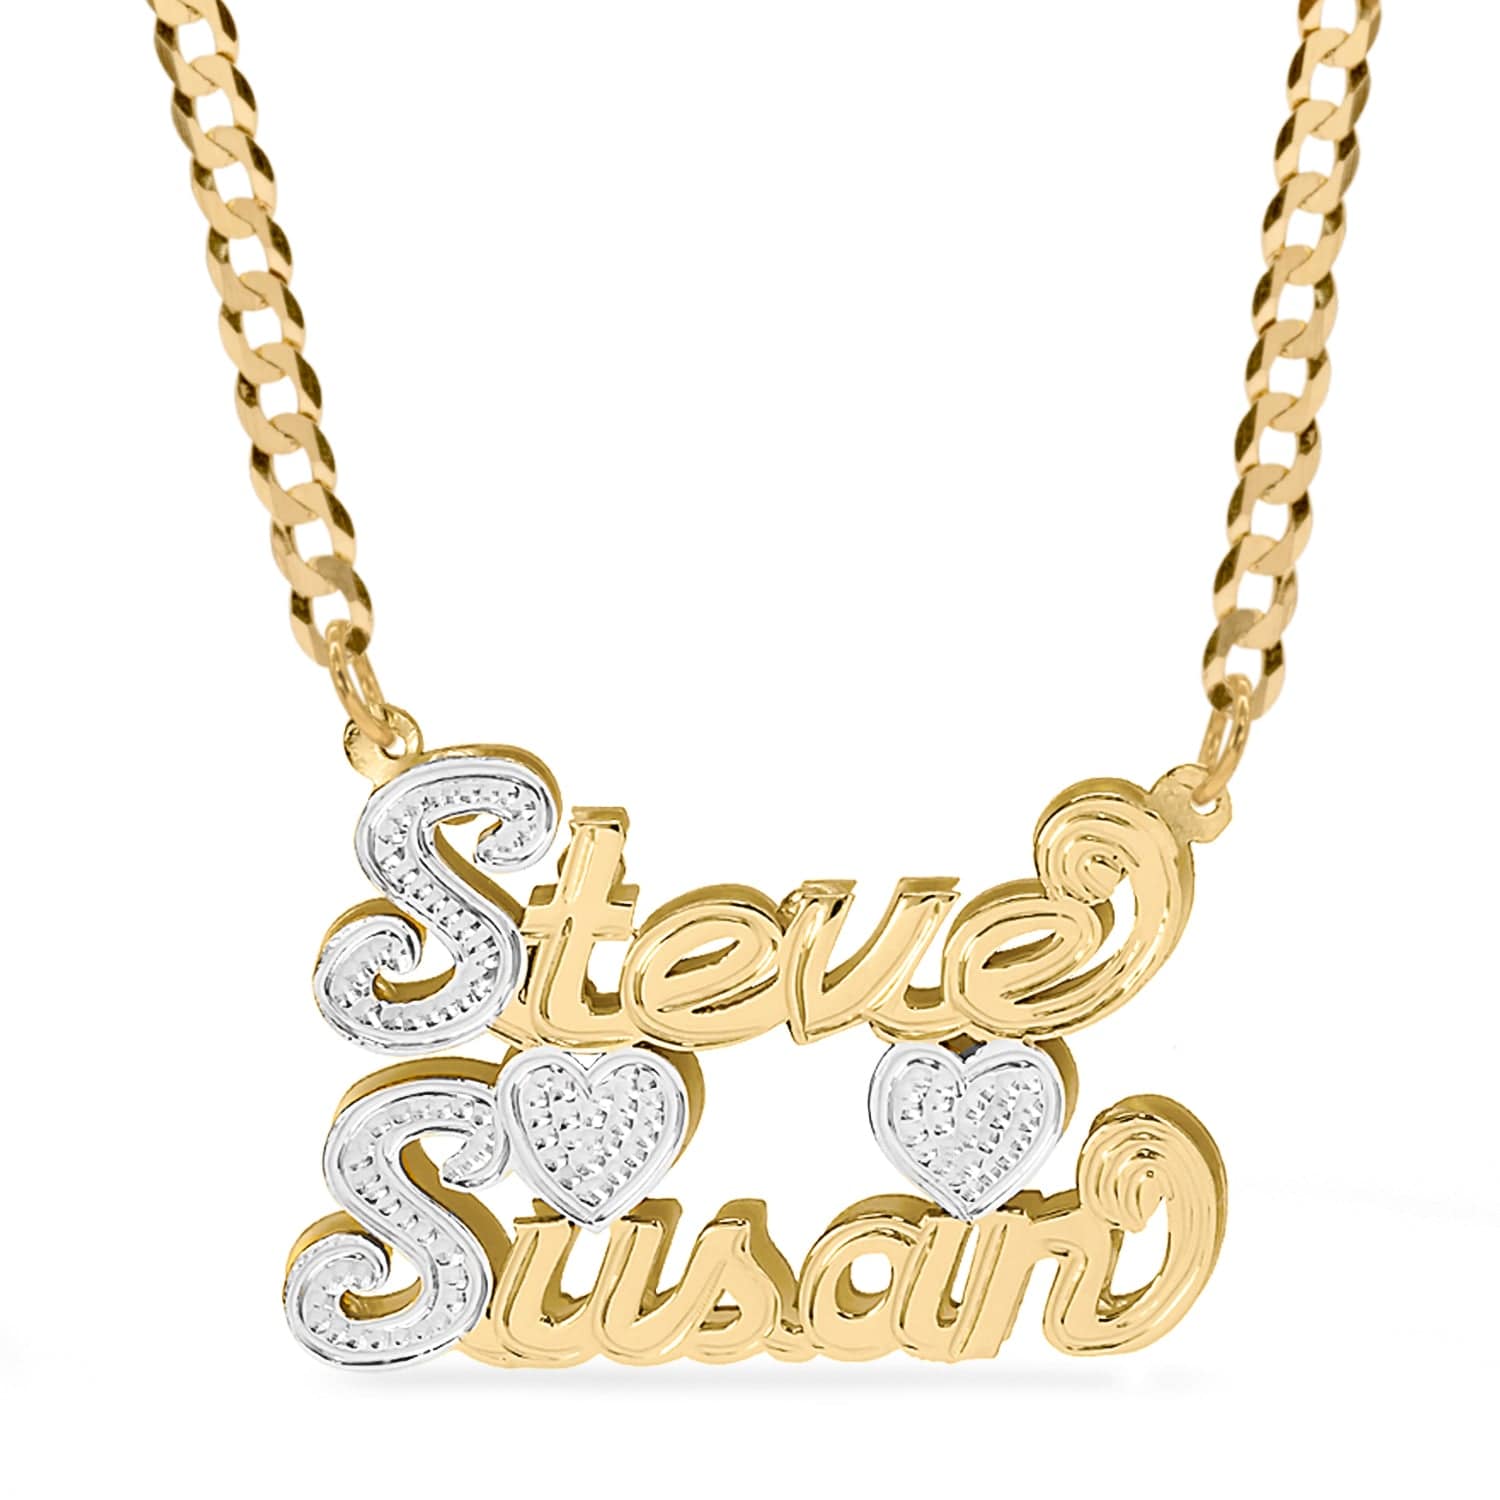 10K Solid Gold / Cuban Chain Solid Gold Double Plated Name Necklace - Couples